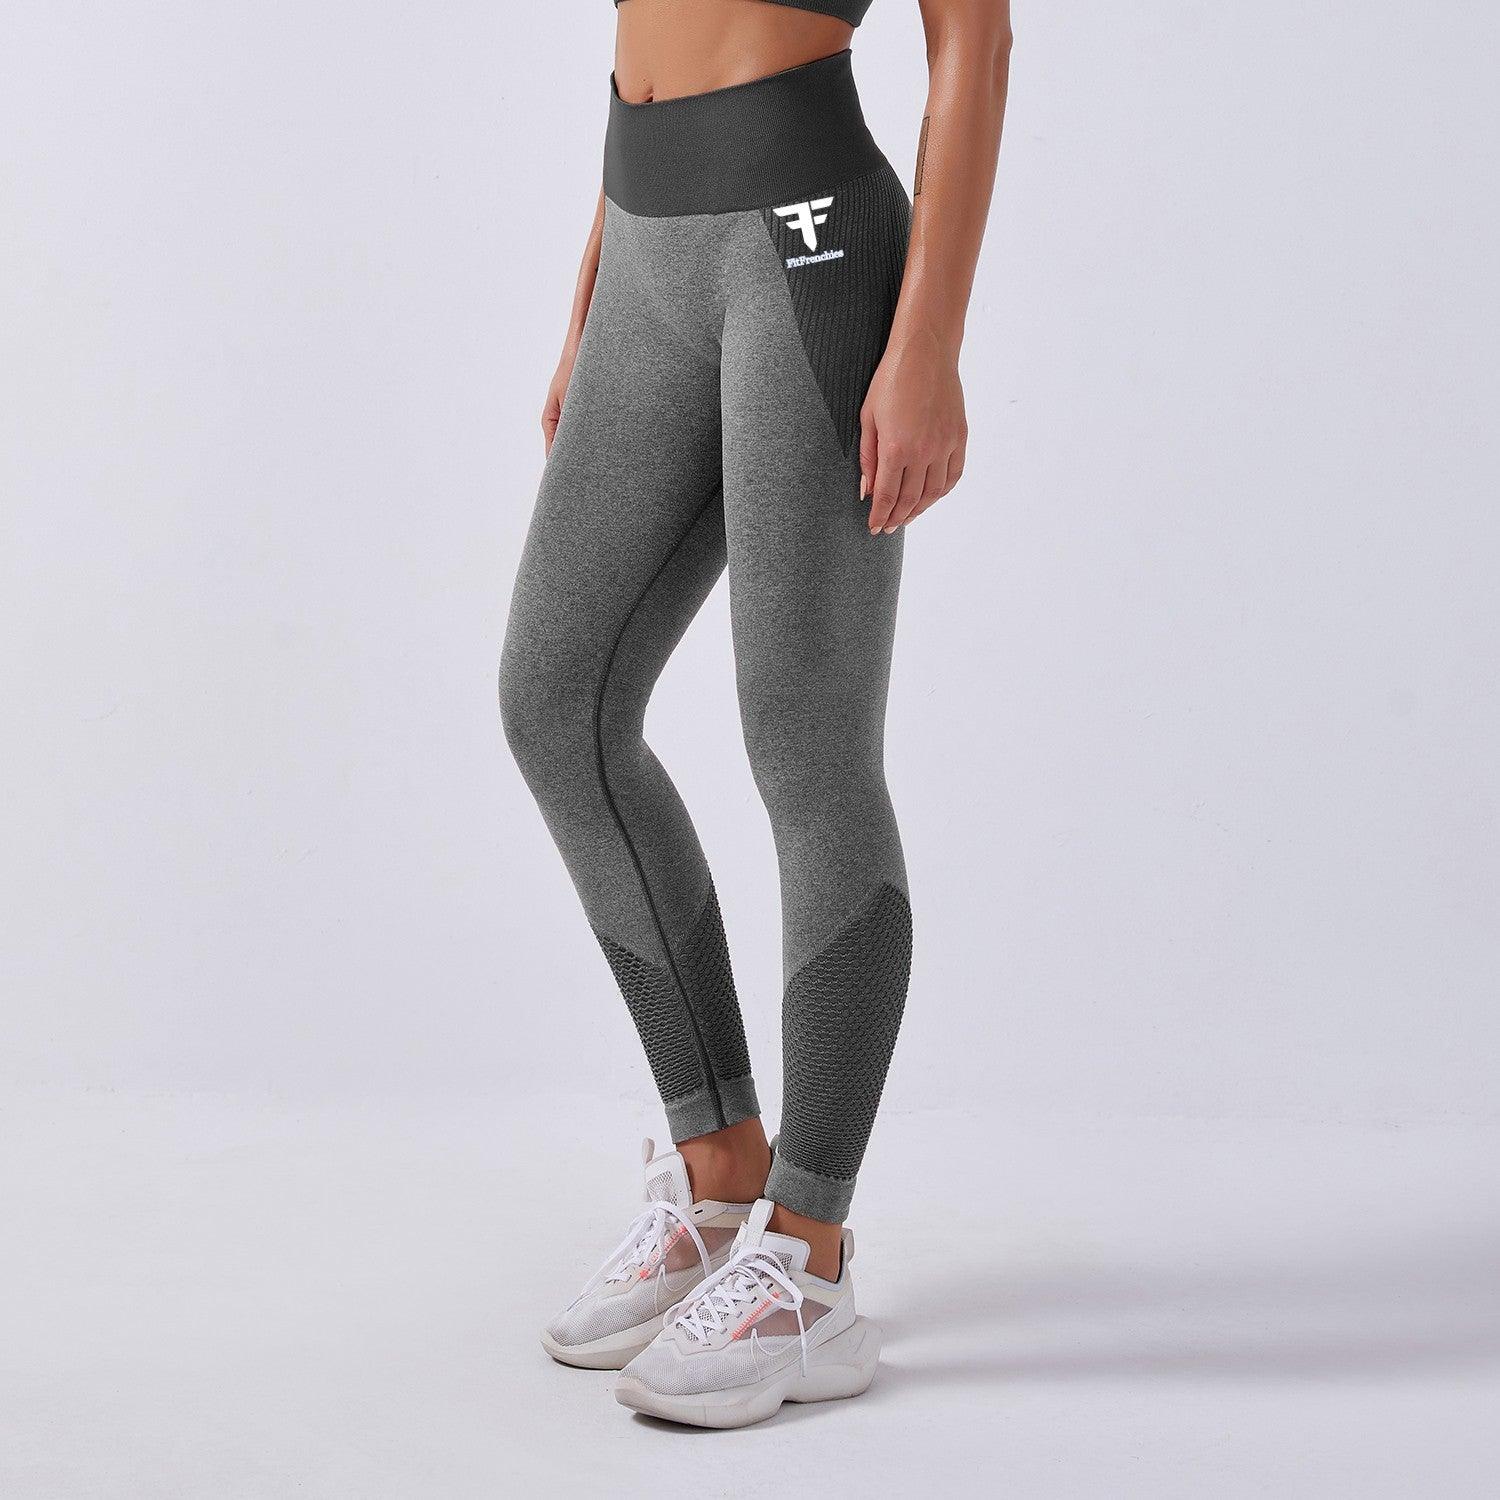 Motion seamless leggings – FITFRENCHIES